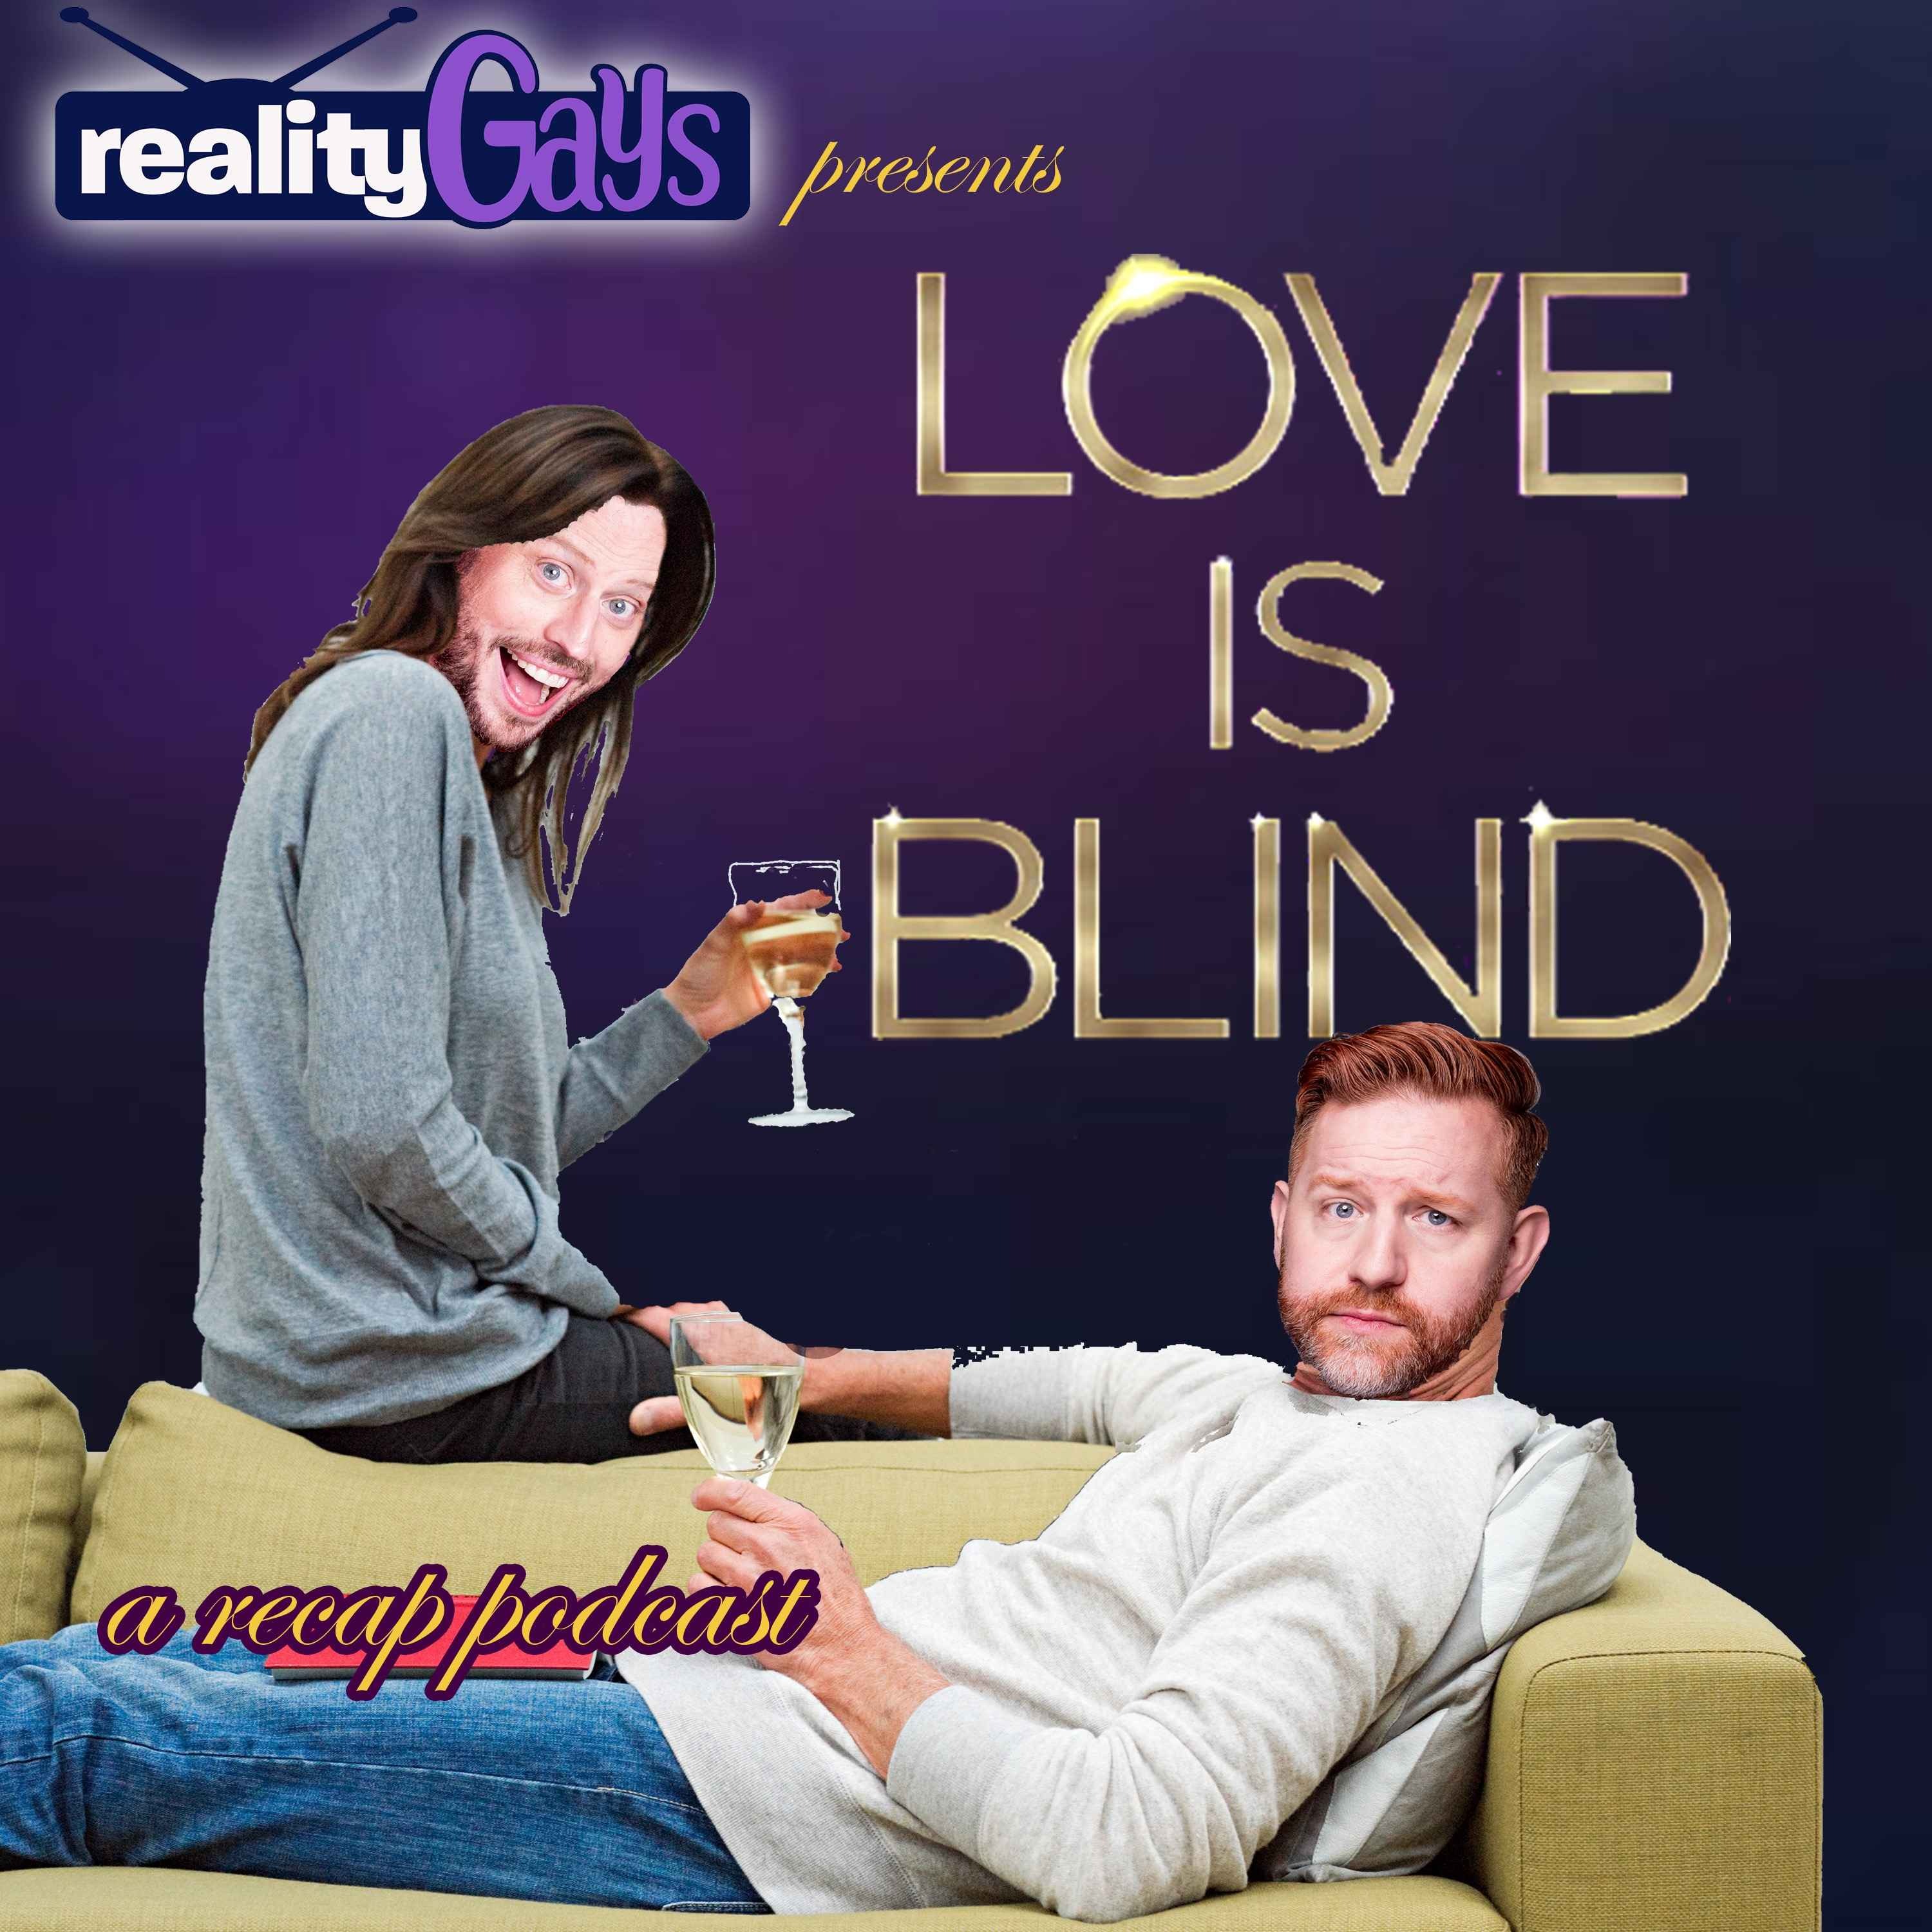 FROM THE VAULT! LOVE IS BLIND: 0101 "Is Love Blind?" Image